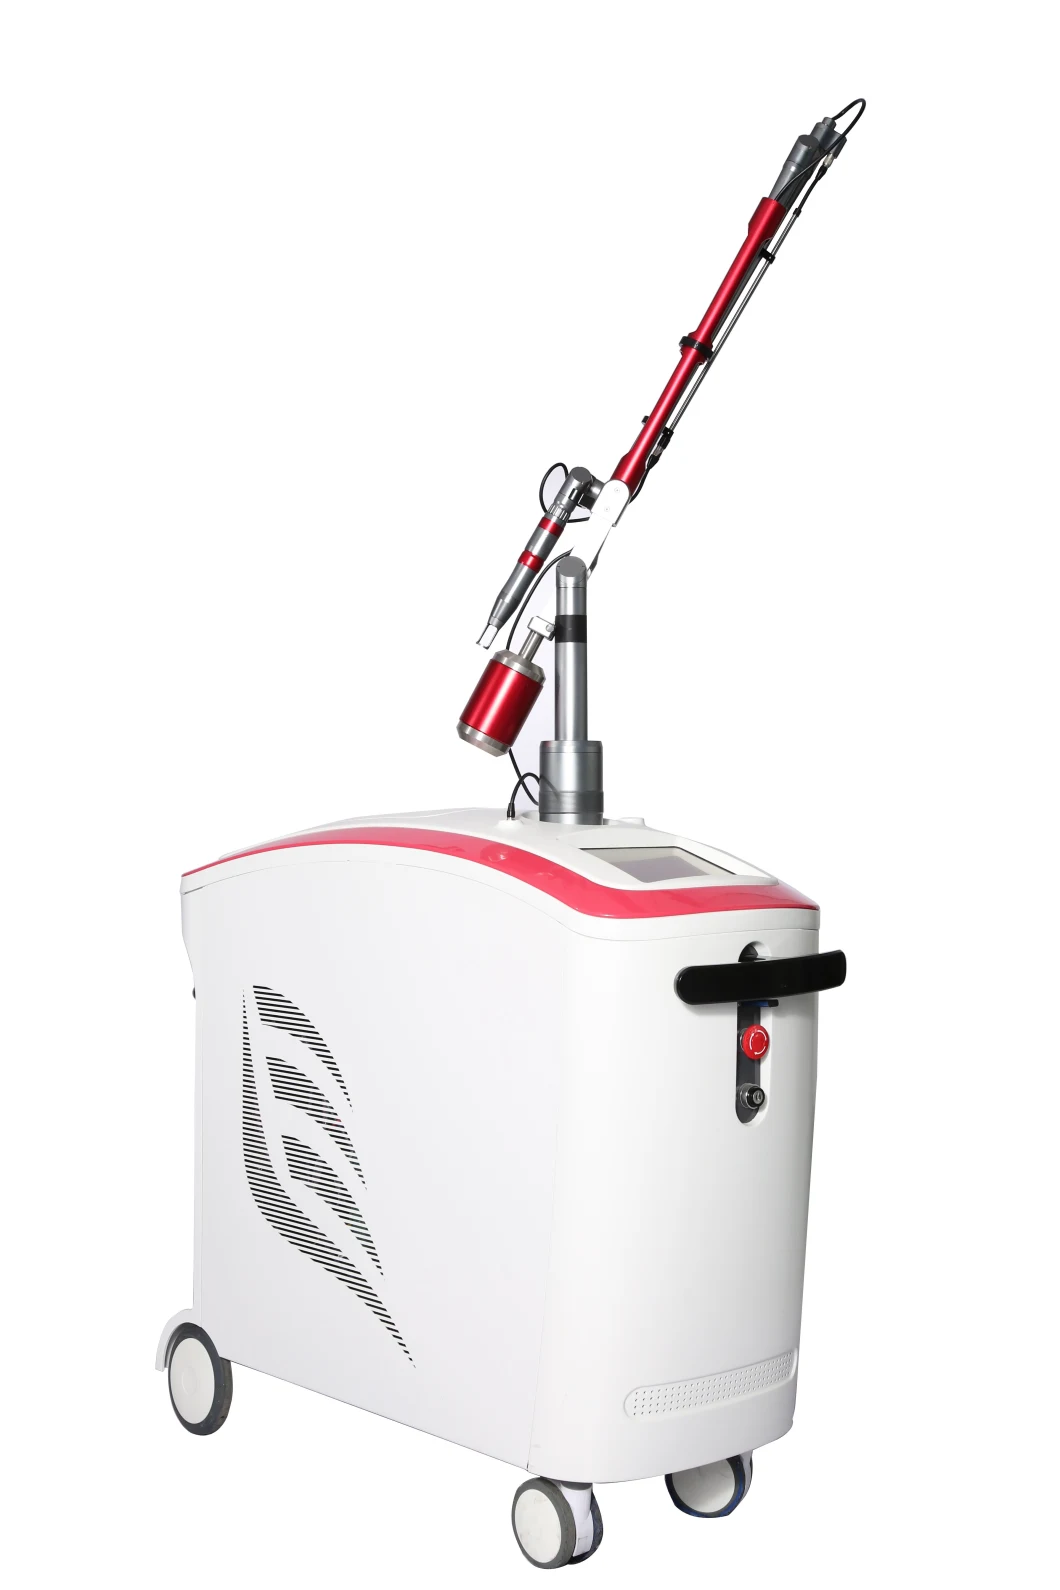 Effective Pigment Removal Picosecond Laser Tattoo Removal Machine